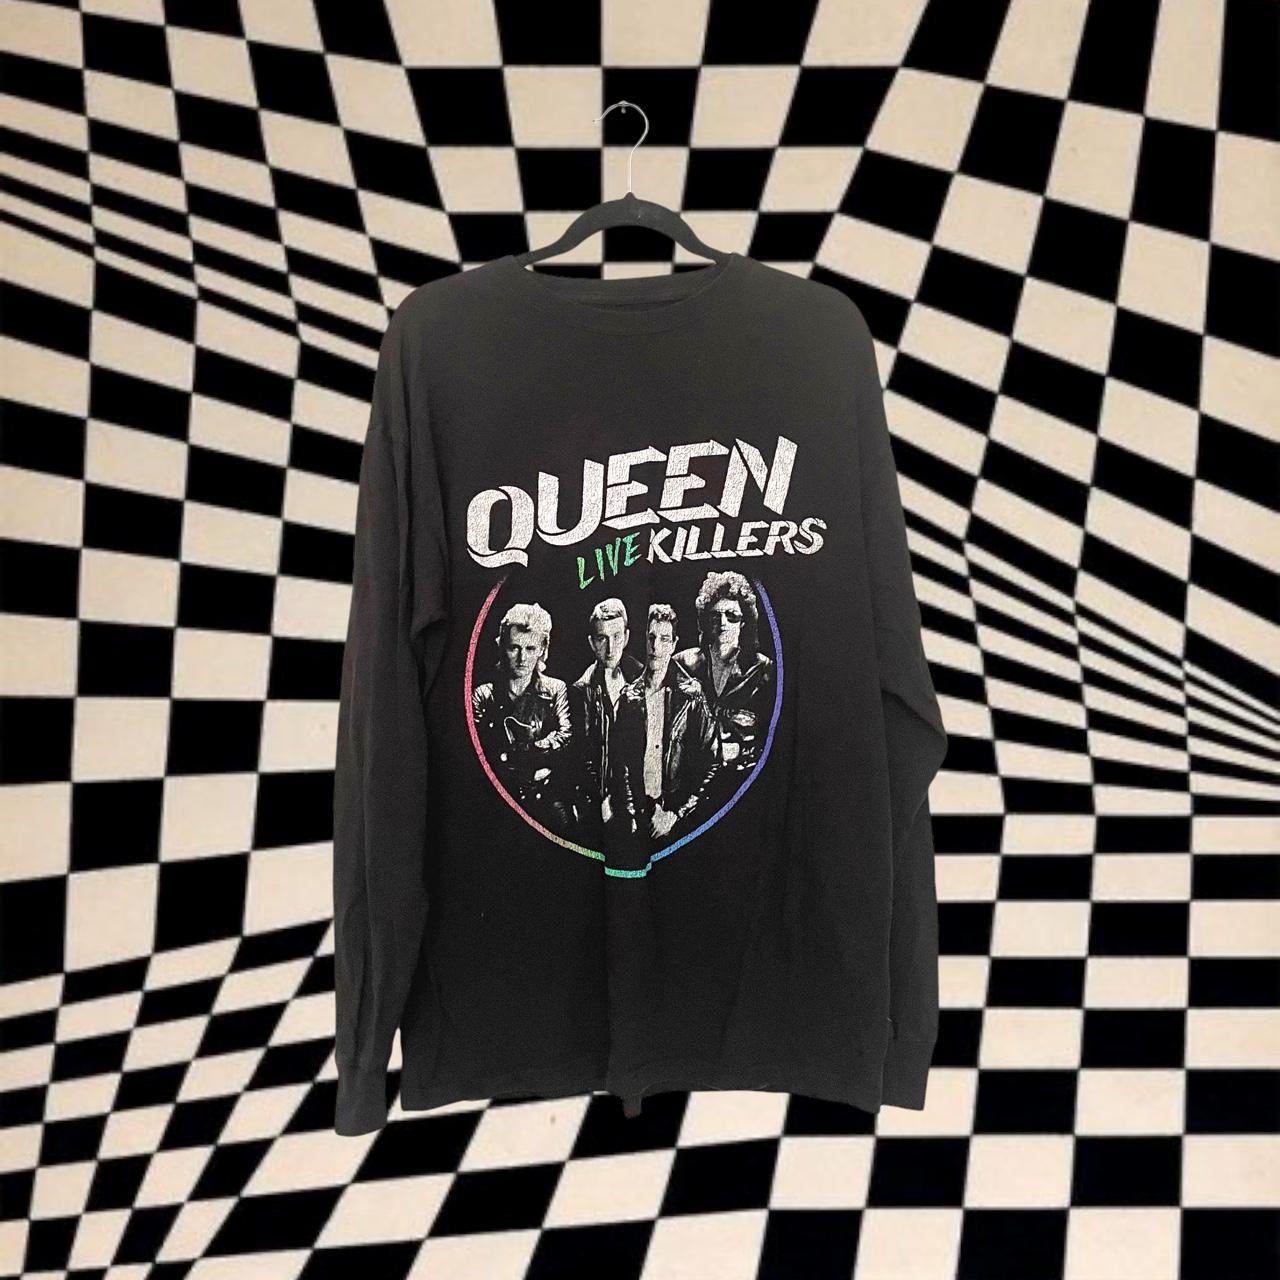 Product Image 1 - Queen graphic tee!

sized as a